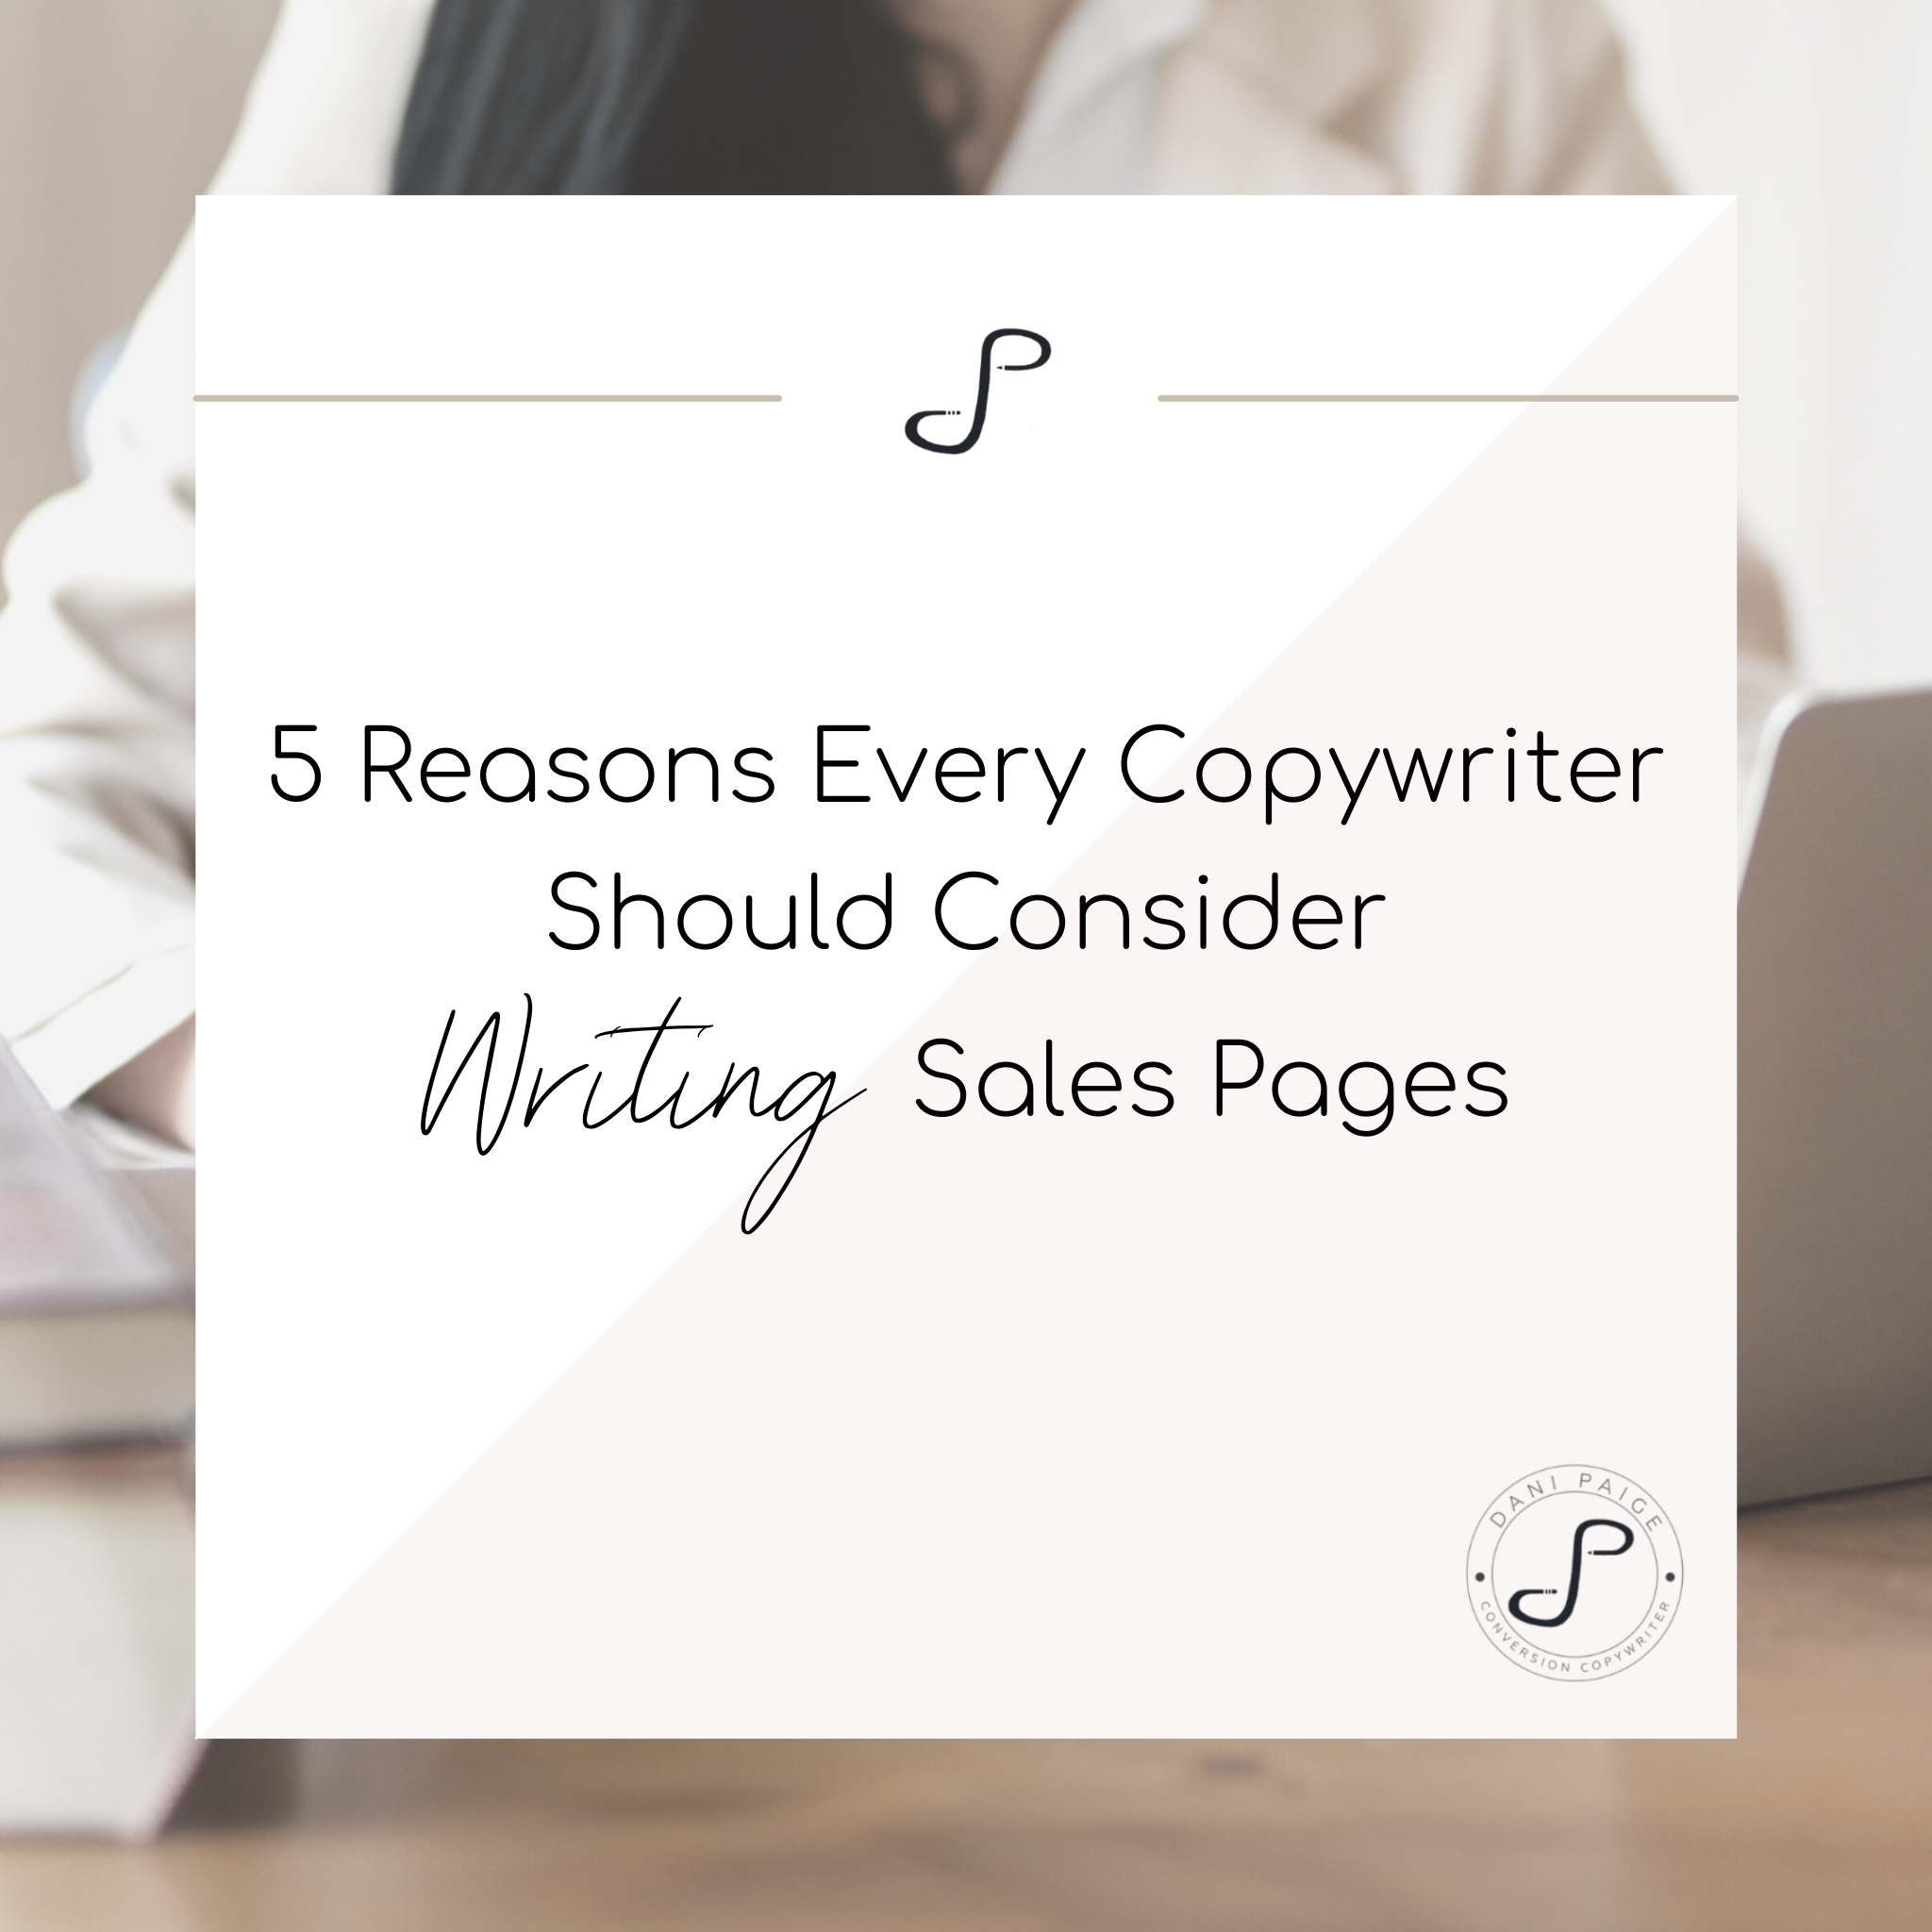 5 Reasons Every Copywriter Should Consider Writing Sales Pages